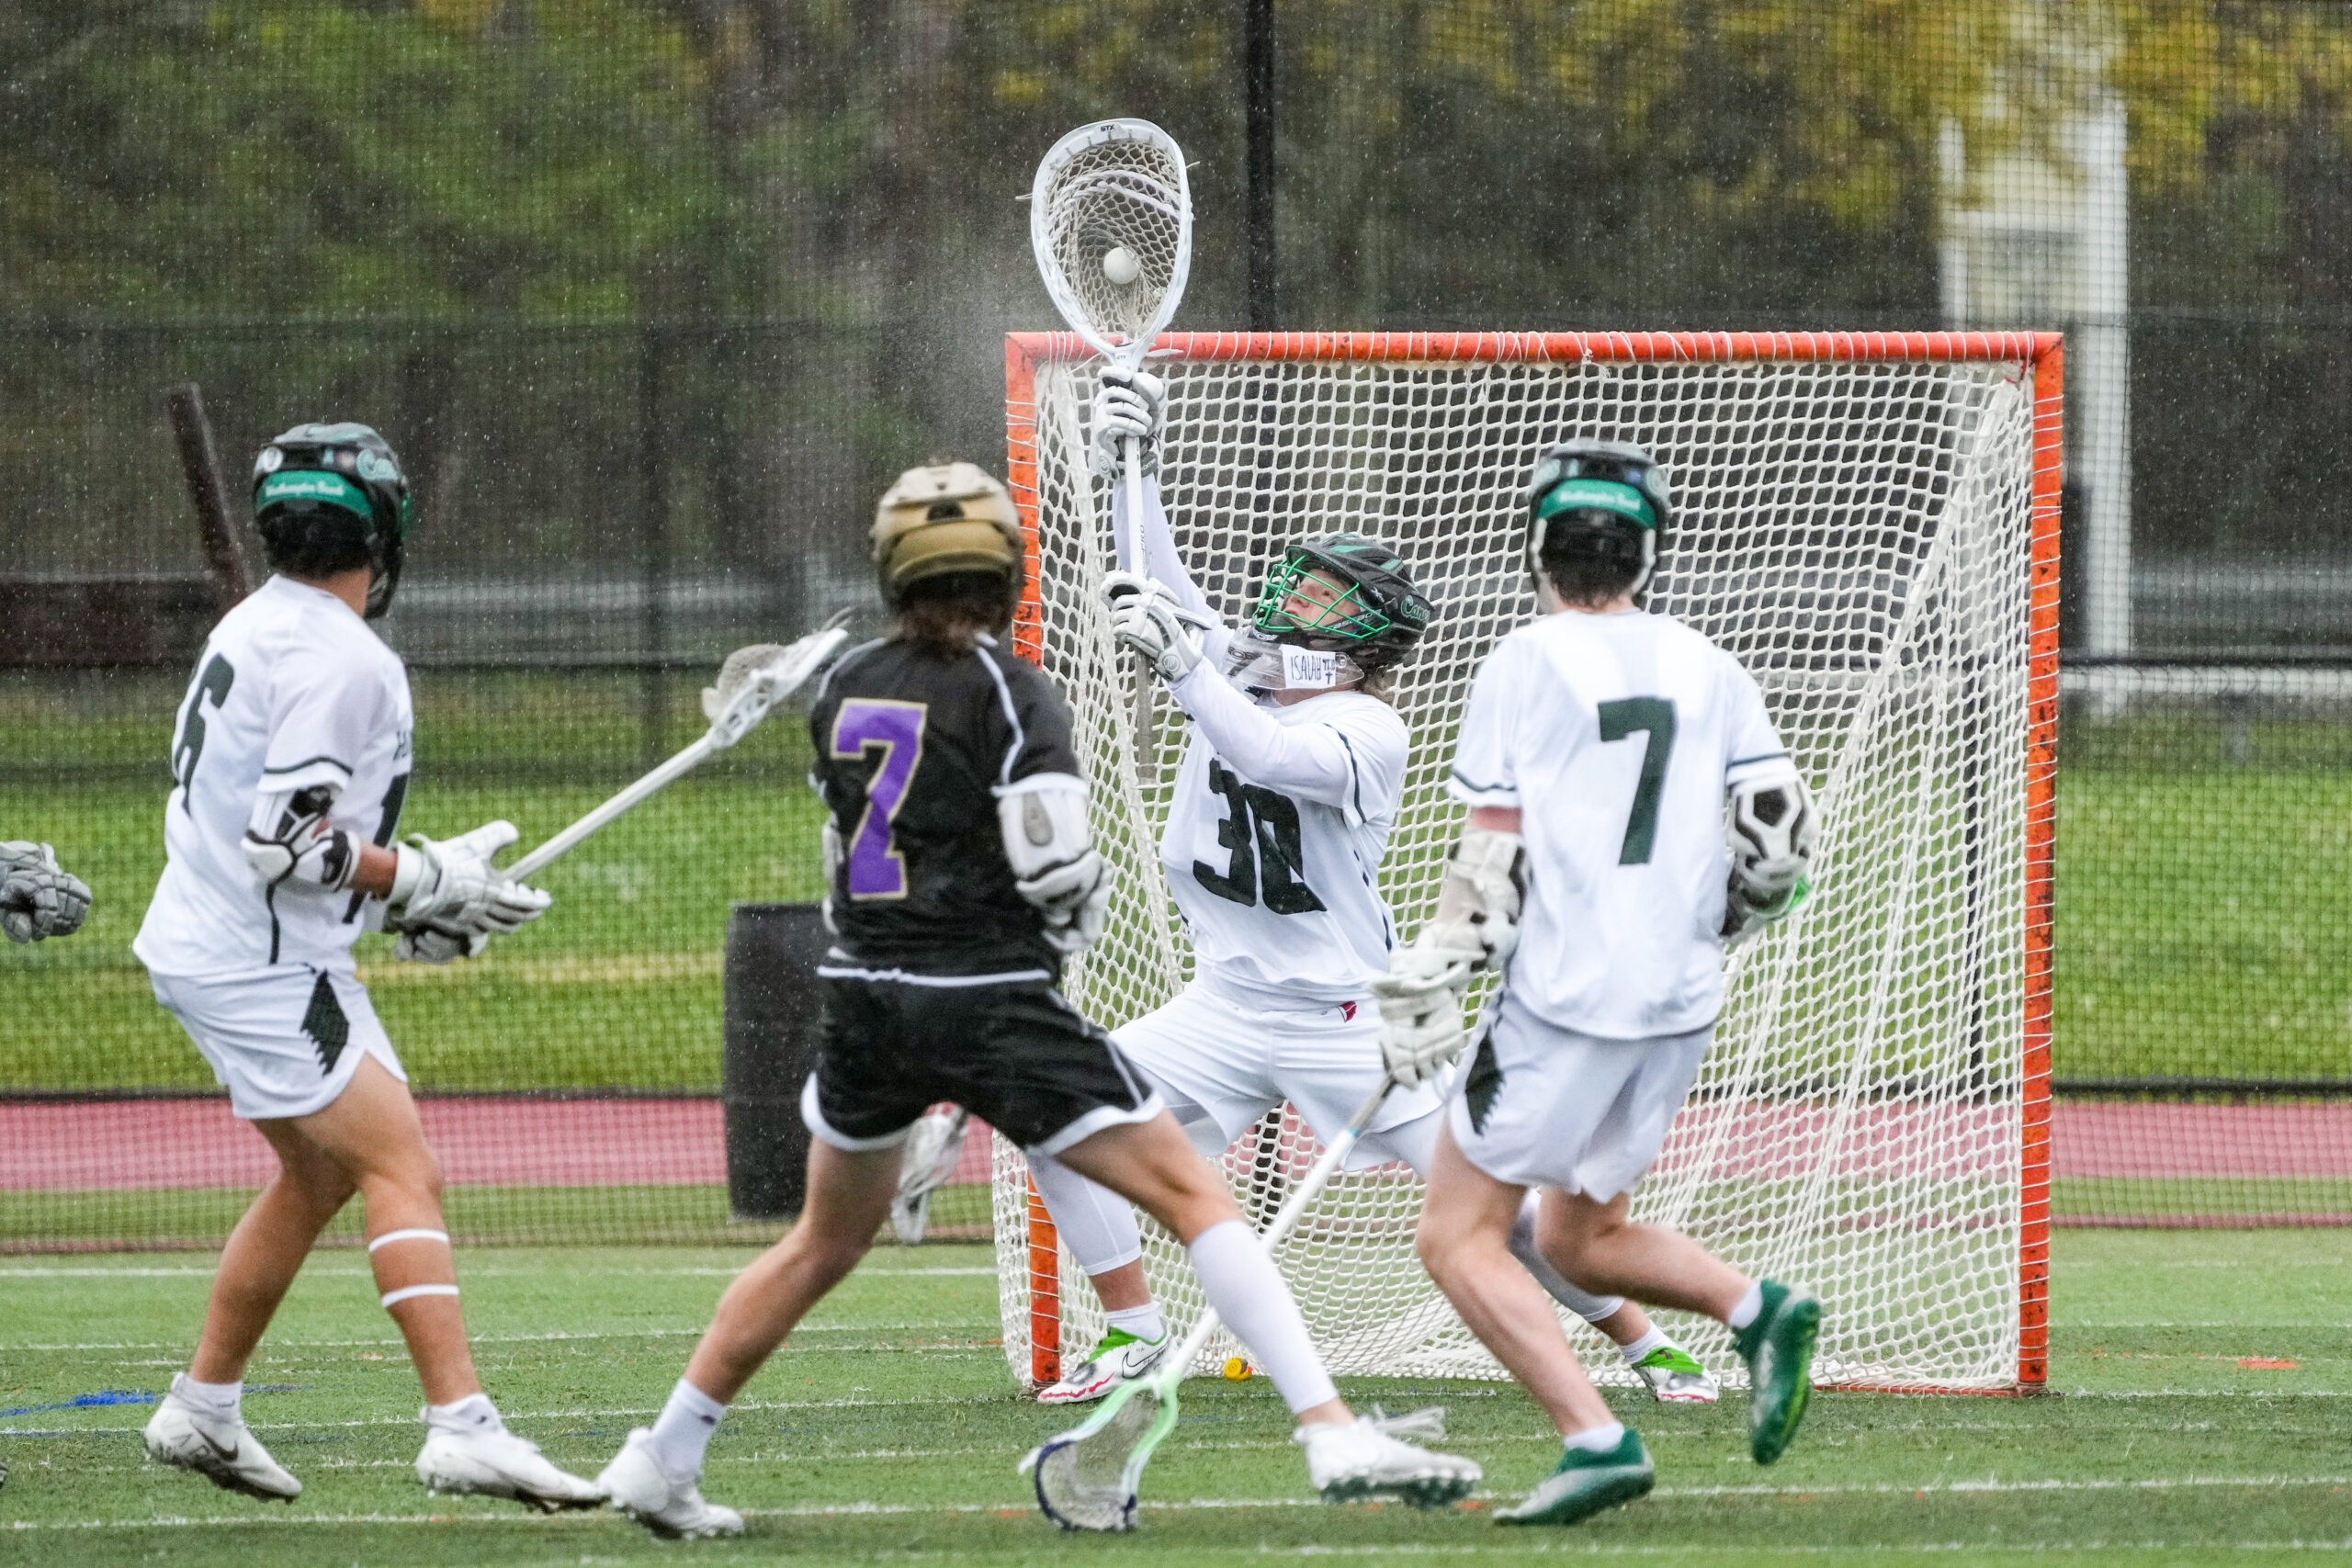 Westhampton Beach senior Jake Dagata makes one of his 11 saves in Friday's 8-6 victory over Islip.   RON ESPOSITO